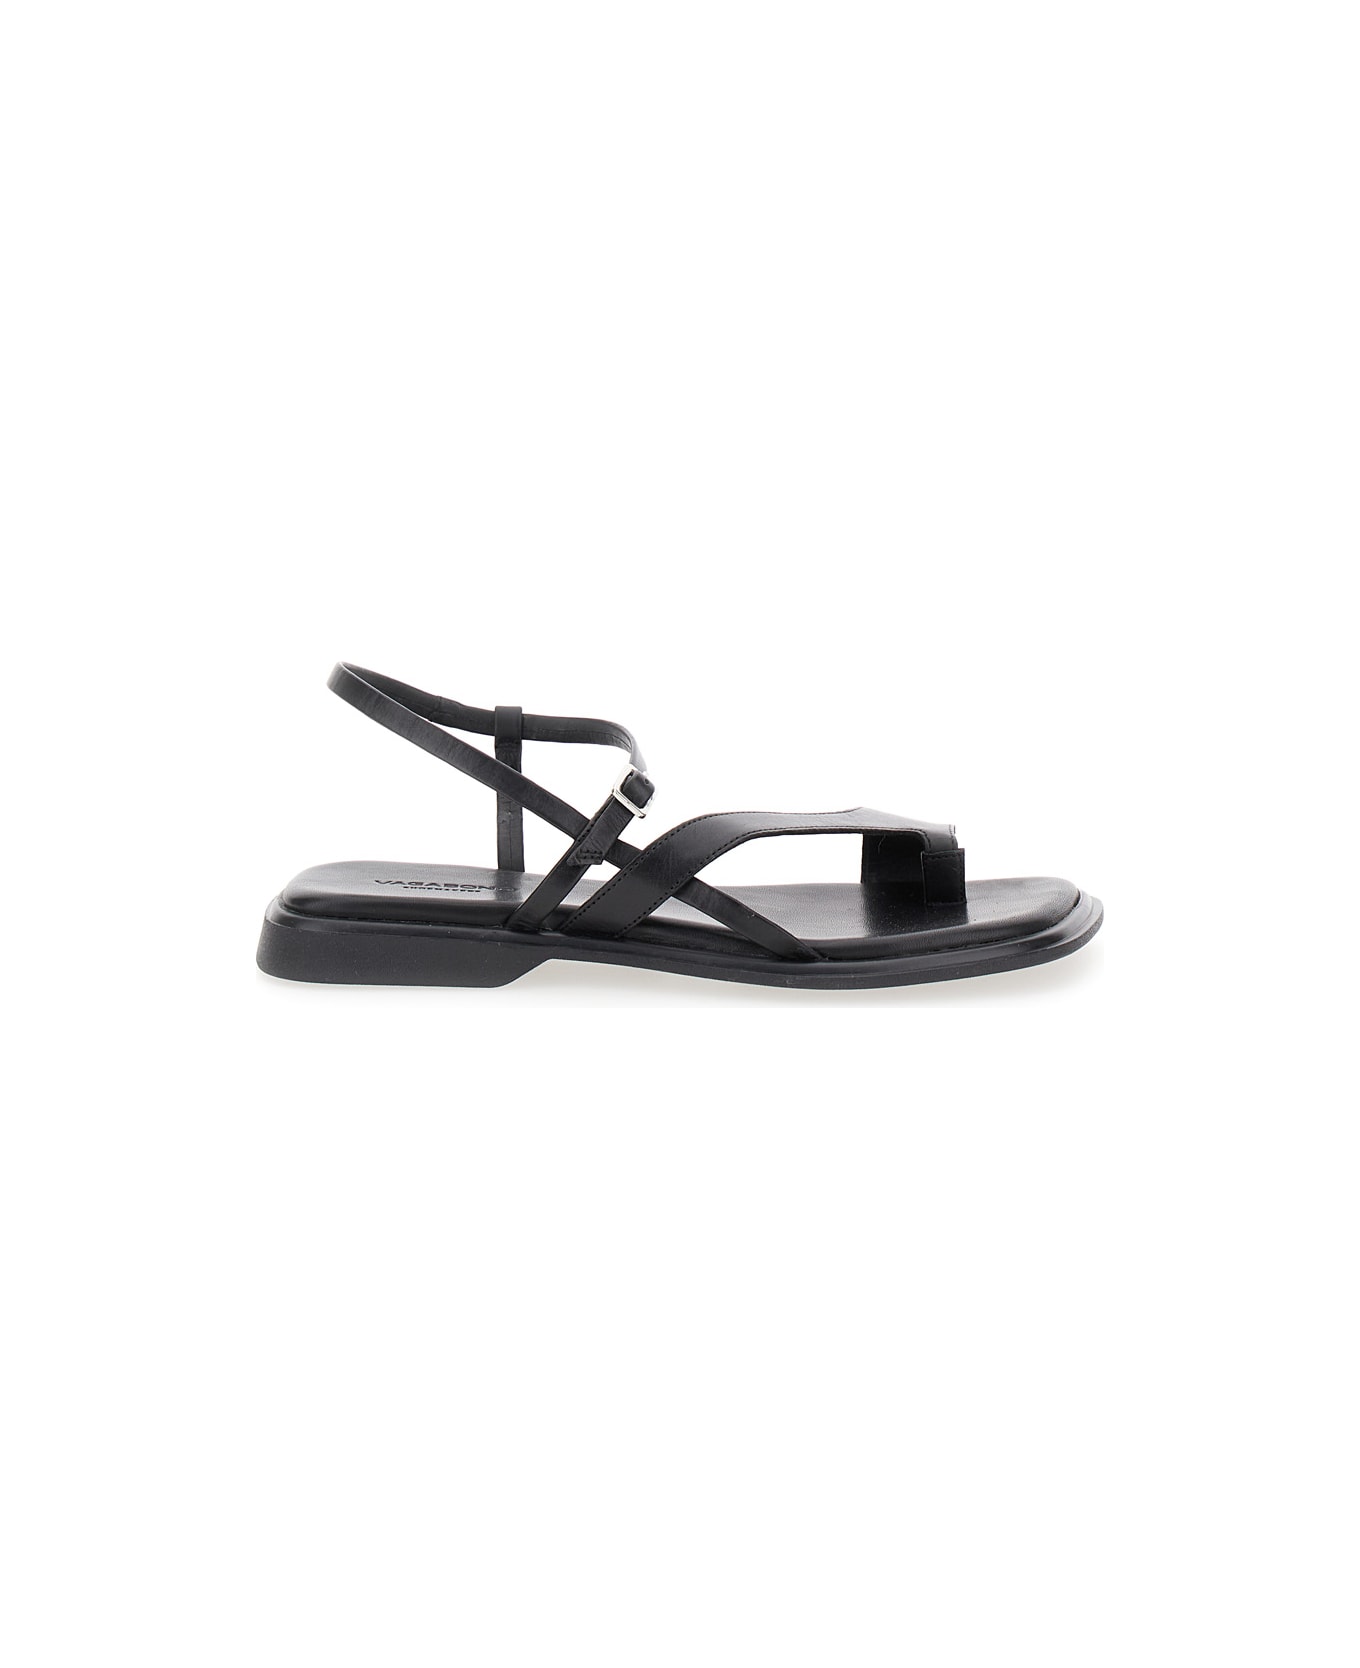 Vagabond 'izzi' Black Thong Sandals With Thin Straps In Leather Woman - Black サンダル